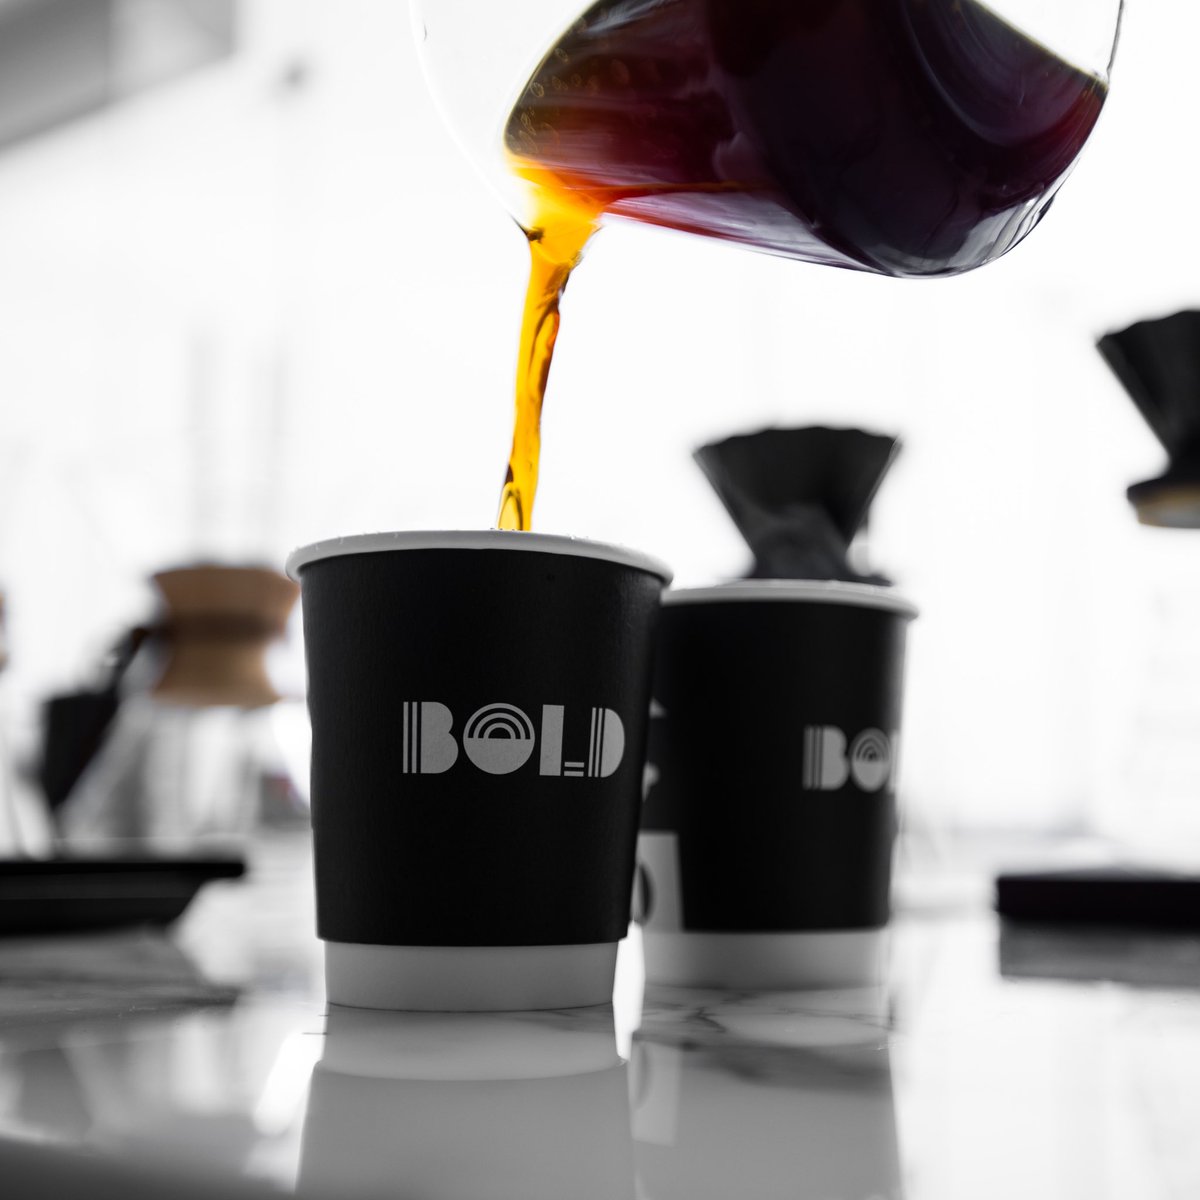 BOLD CAFE on Twitter: "How many cups have you had this morning ? كم كوب قهوة  شربته اليوم صباحاً !؟… "